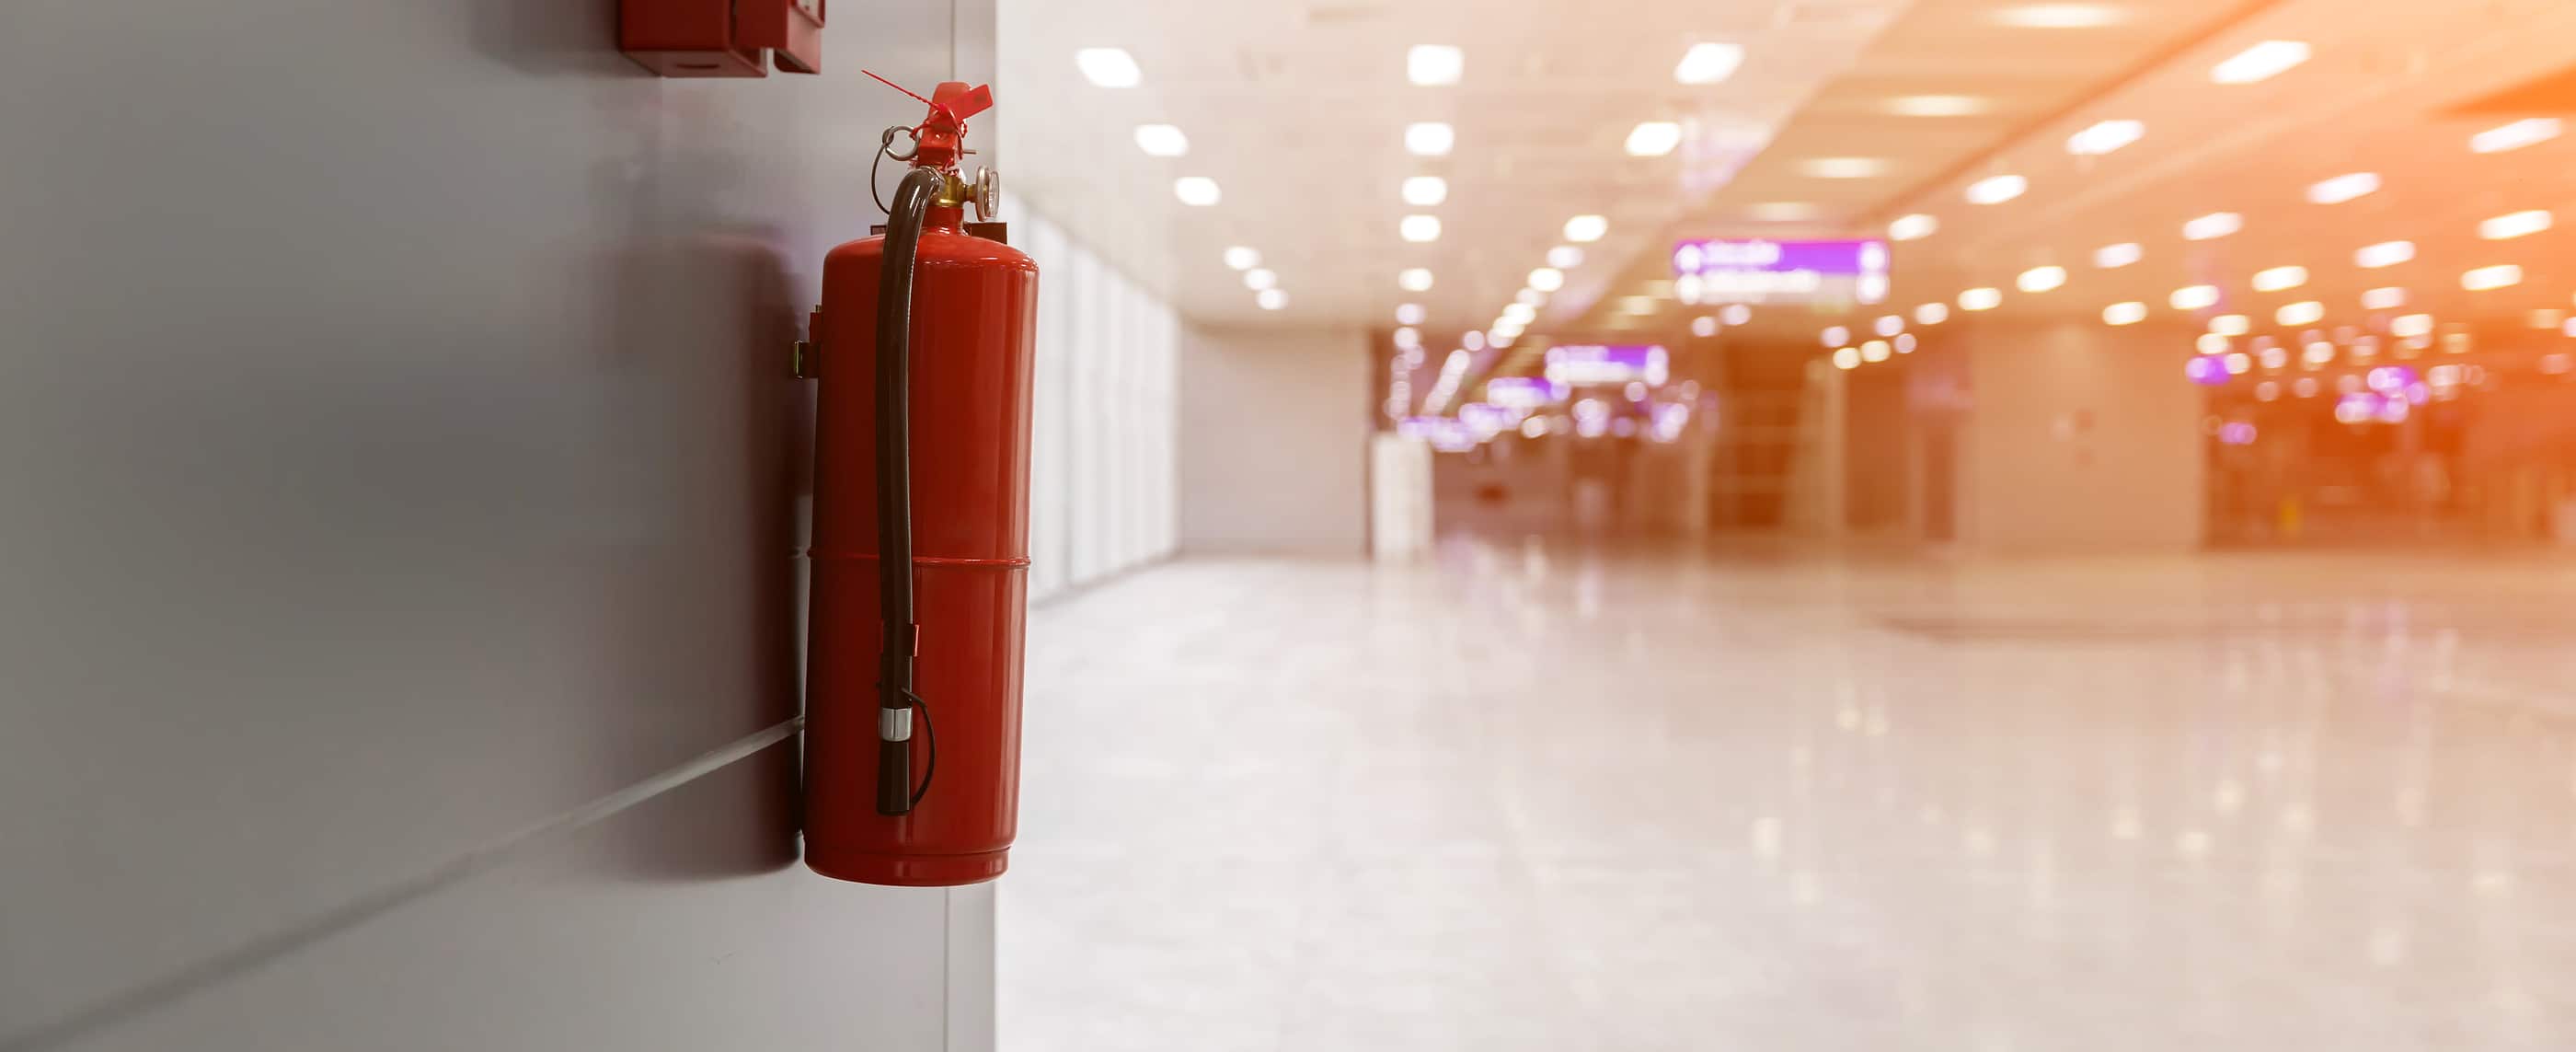 Dry chemical powder fire extinguisher in corridor. Install a fire extinguisher on the wall in building. A red fire-extinguisher hangs on wall .